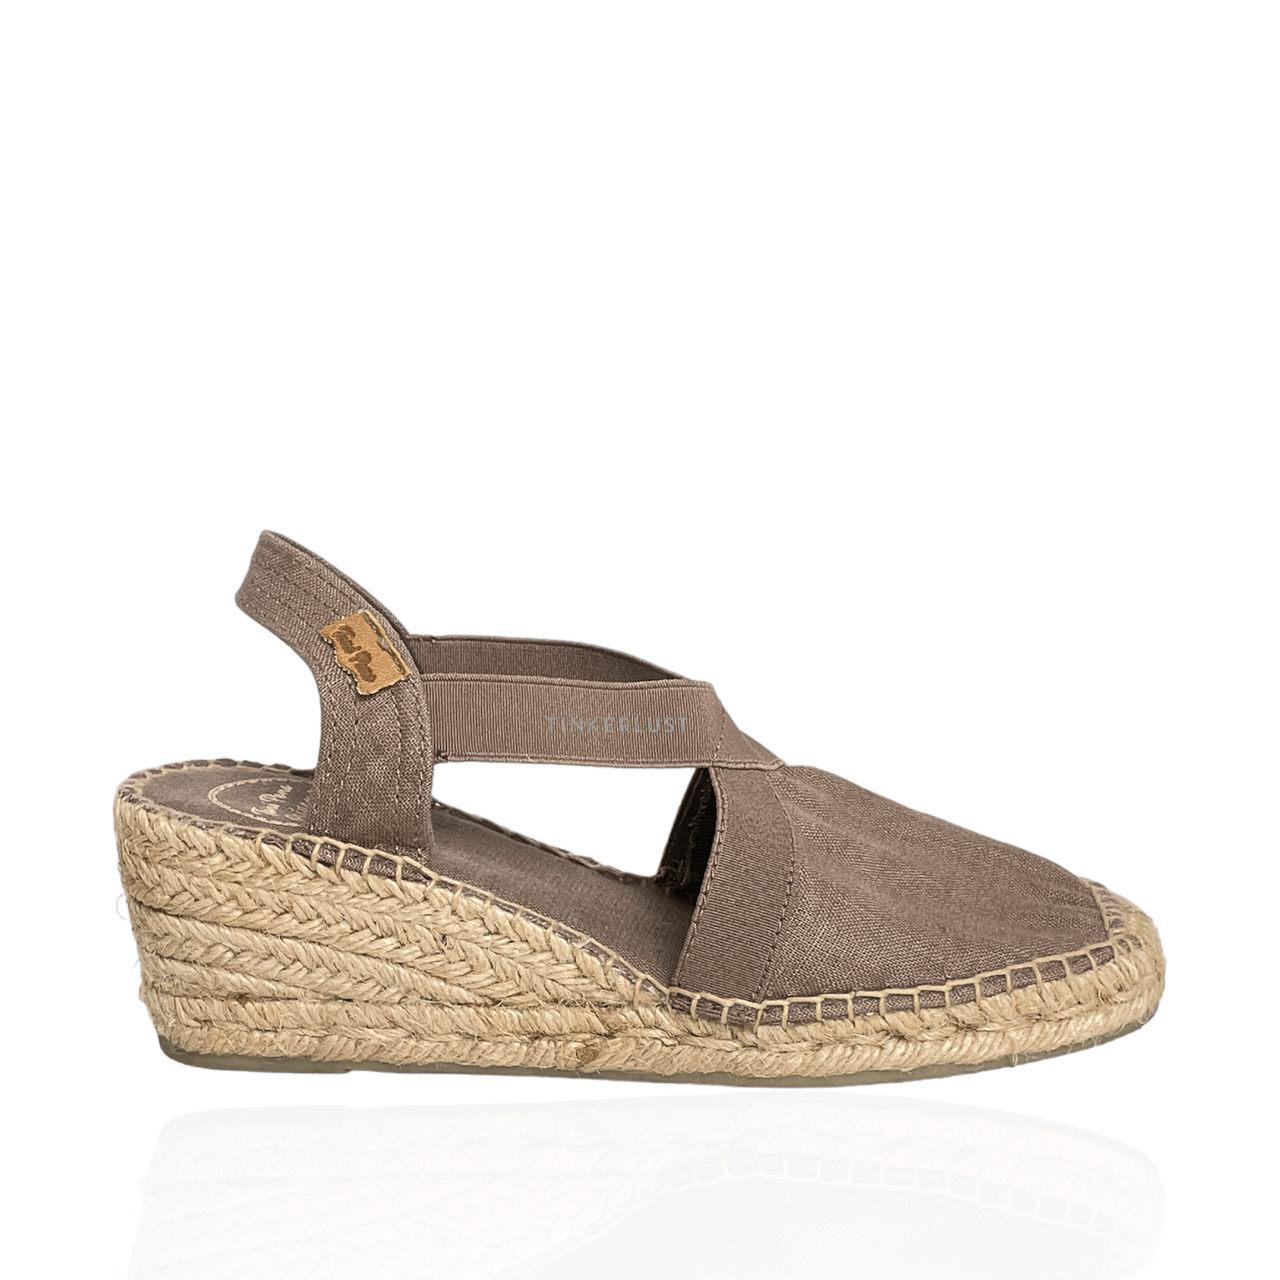 Toni Pons Taupe Wedges